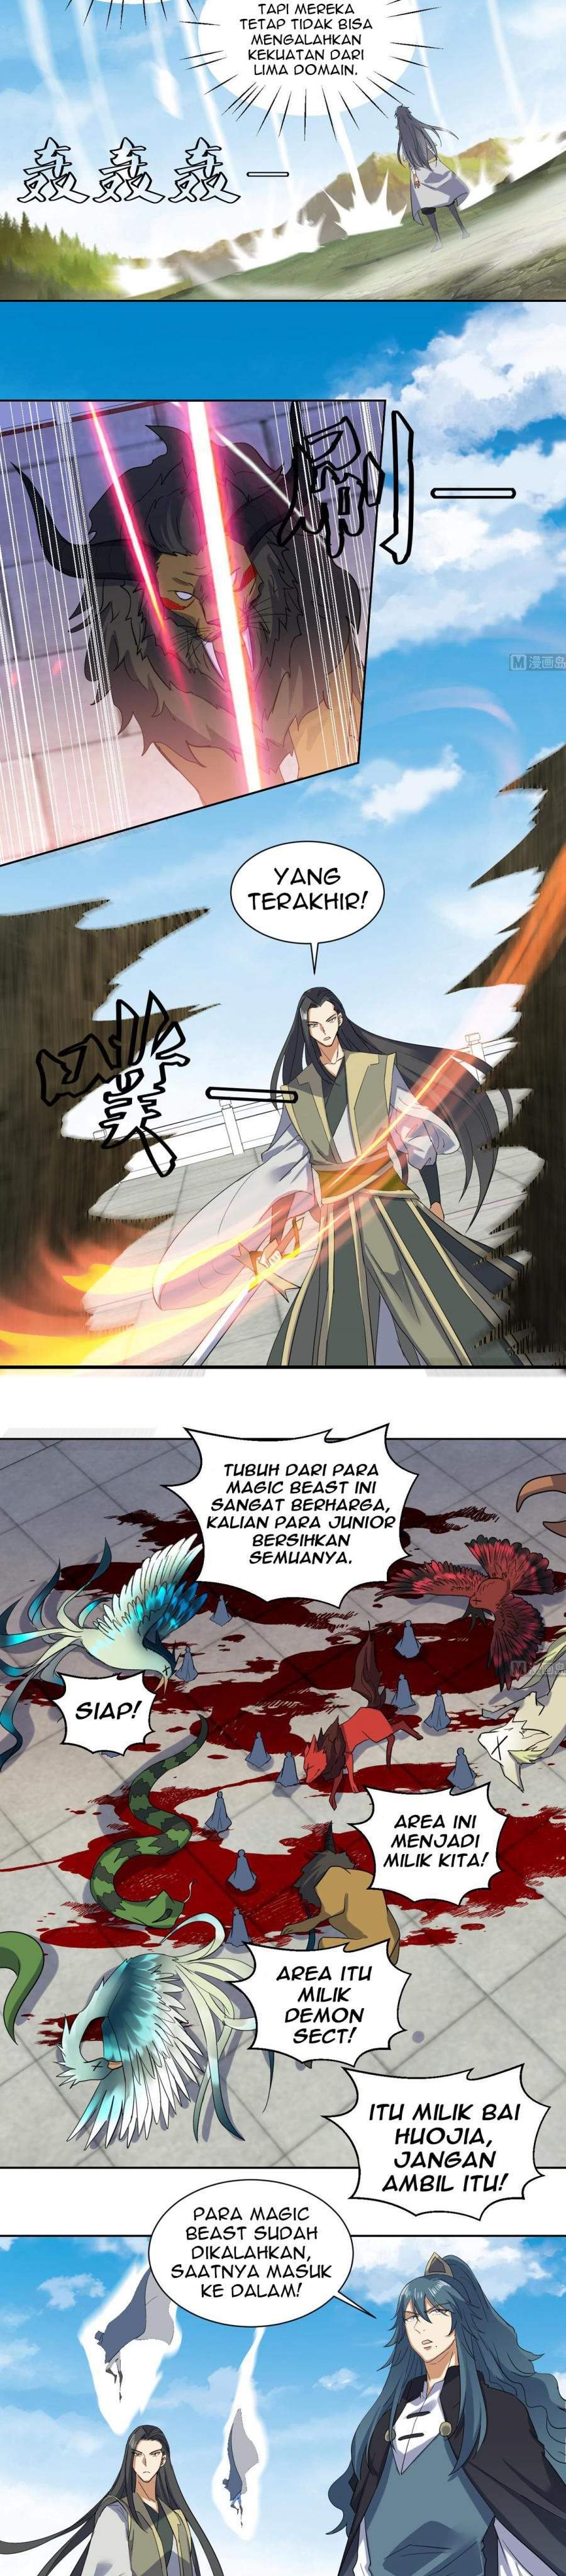 The Nine Heaven of Martial Arts Chapter 205